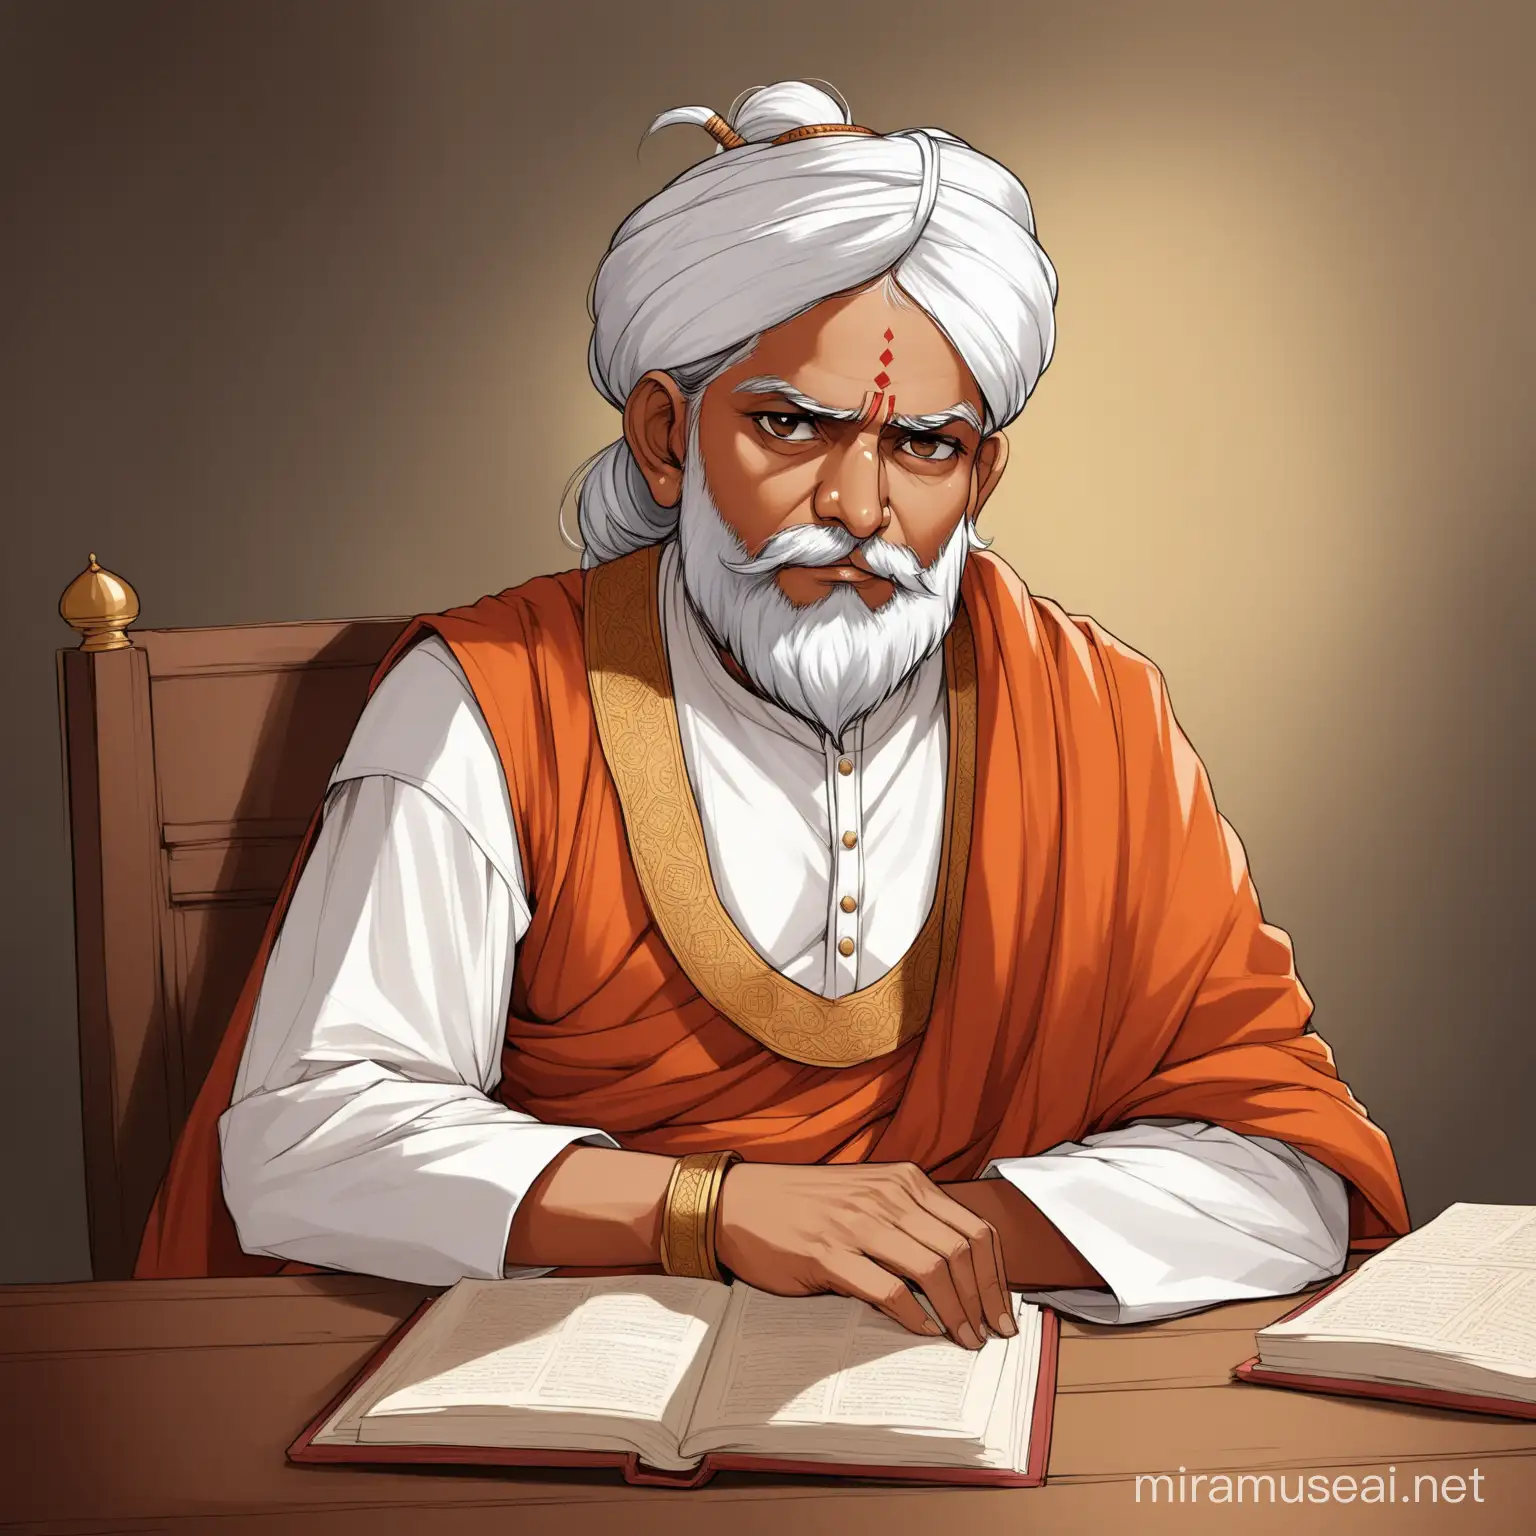 South Indian Medieval Minister Contemplating a Solution